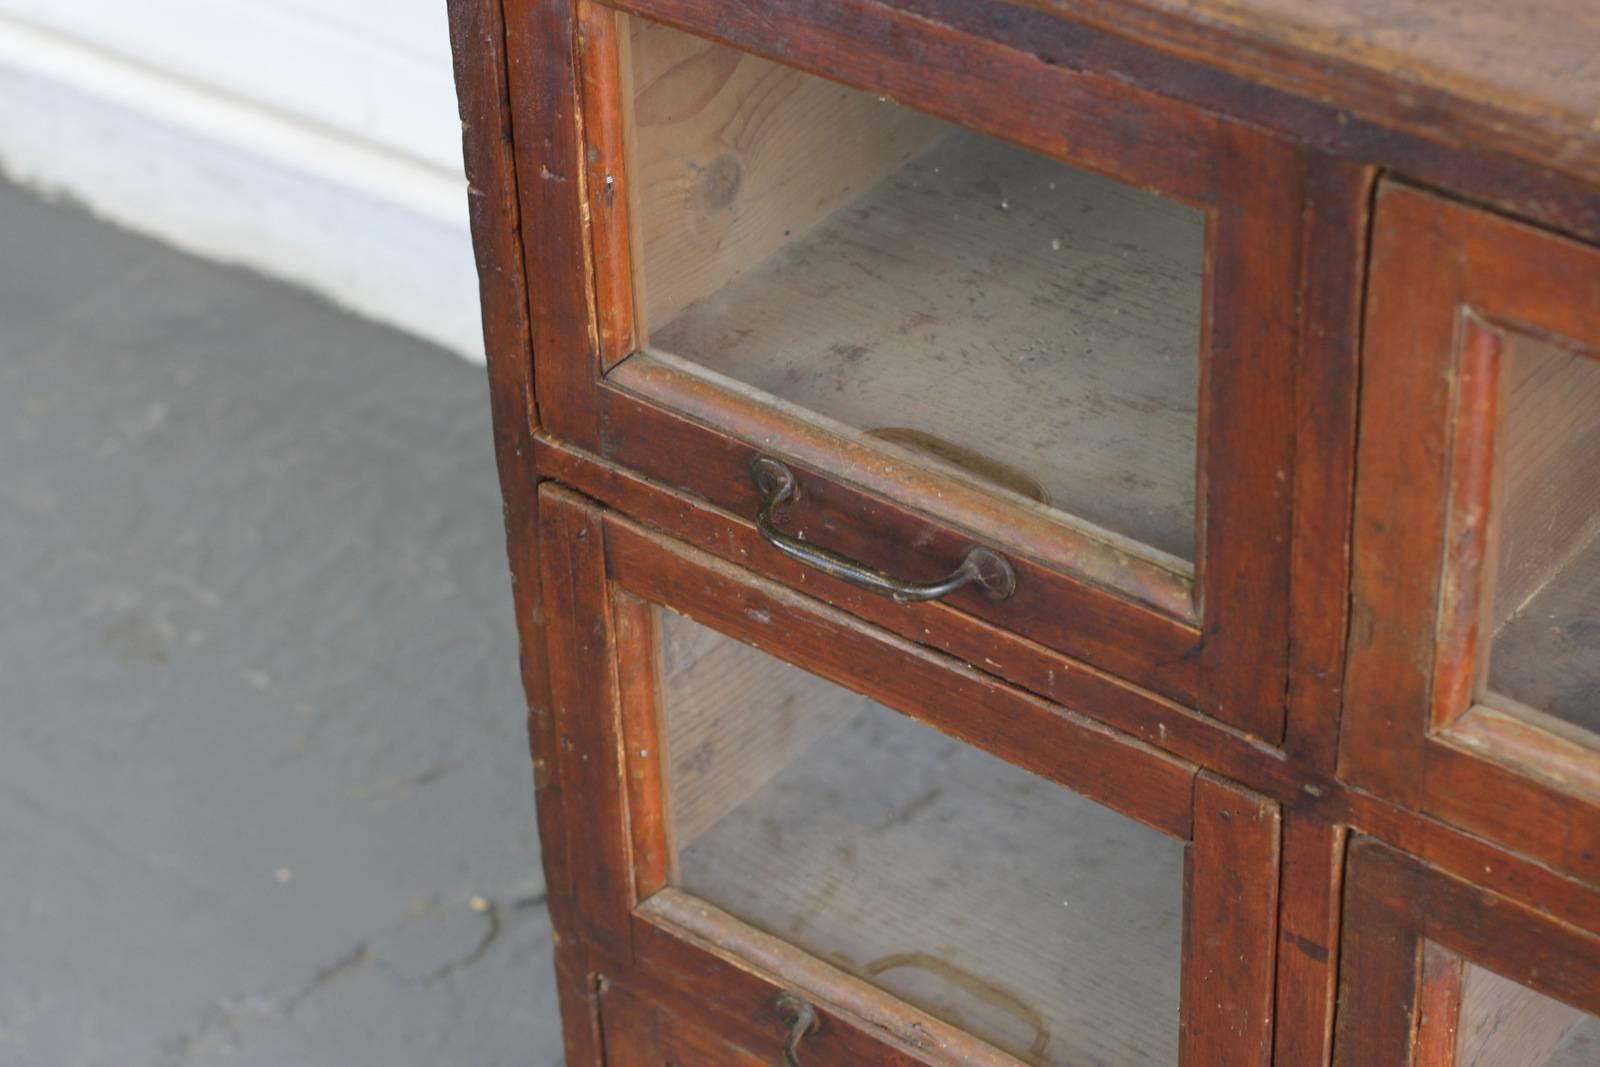 - Nine pull out windowed drawers
- Brass handles
- Pine drawers, top and sides
- French, circa 1900
- Measure: 120cm wide x 91cm tall x 70cm deep
- Each drawers measures 31cm wide x 21cm tall x 50cm deep

Condition report

All the drawers